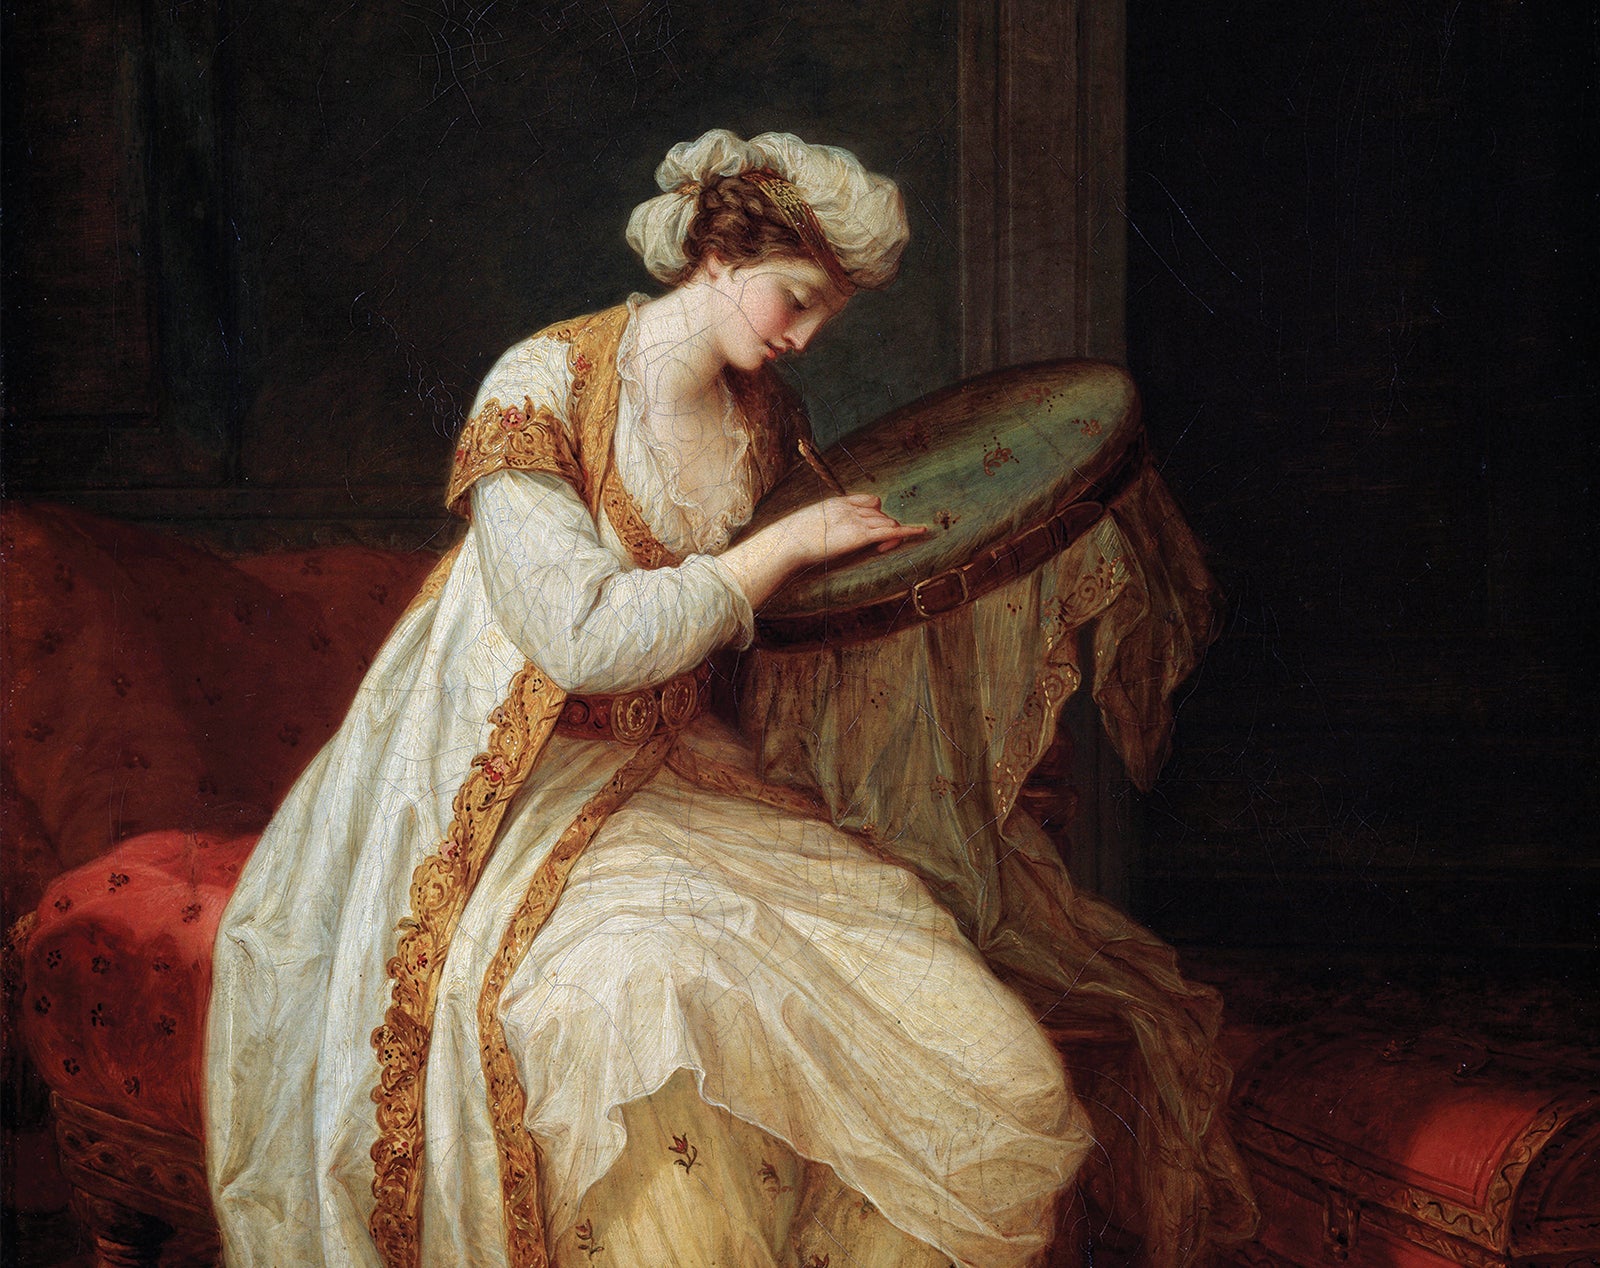  'A Turkish Woman Embroiders with Golden Threads', Angelica Kauffman, 1773.